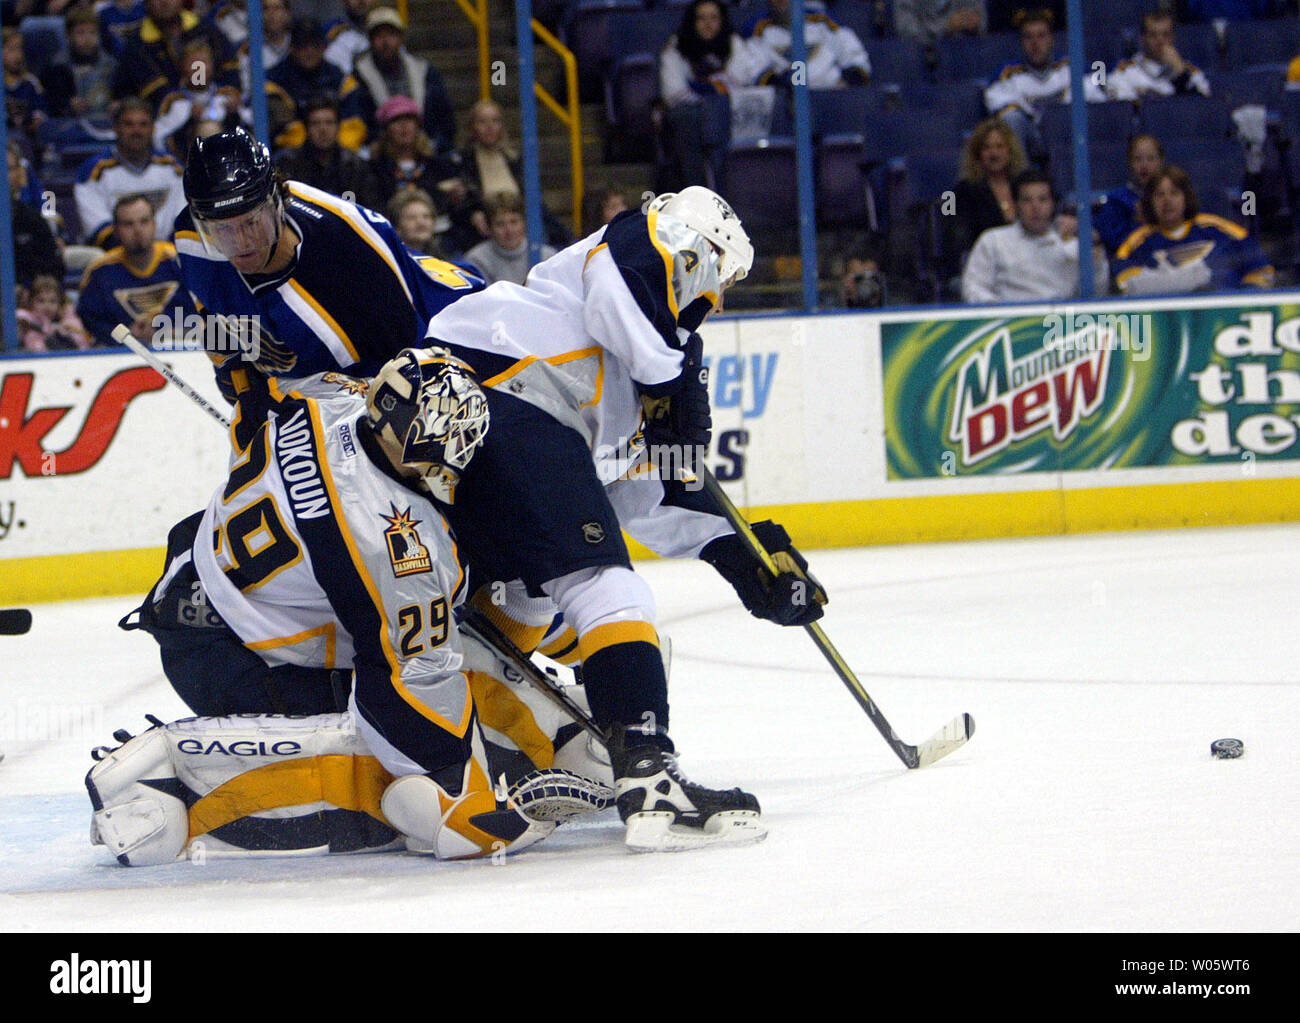 Nashville Predators goaltender Tomas Vokoun (29) is partically screened as teammate Mark Eaton stops the puck while St. Louis Blues Brian Savage tries to skate in during the first period at the Savvis Center in St. Louis on March 11, 2004 (UPI Photo/Bill Greenblatt) Stock Photo